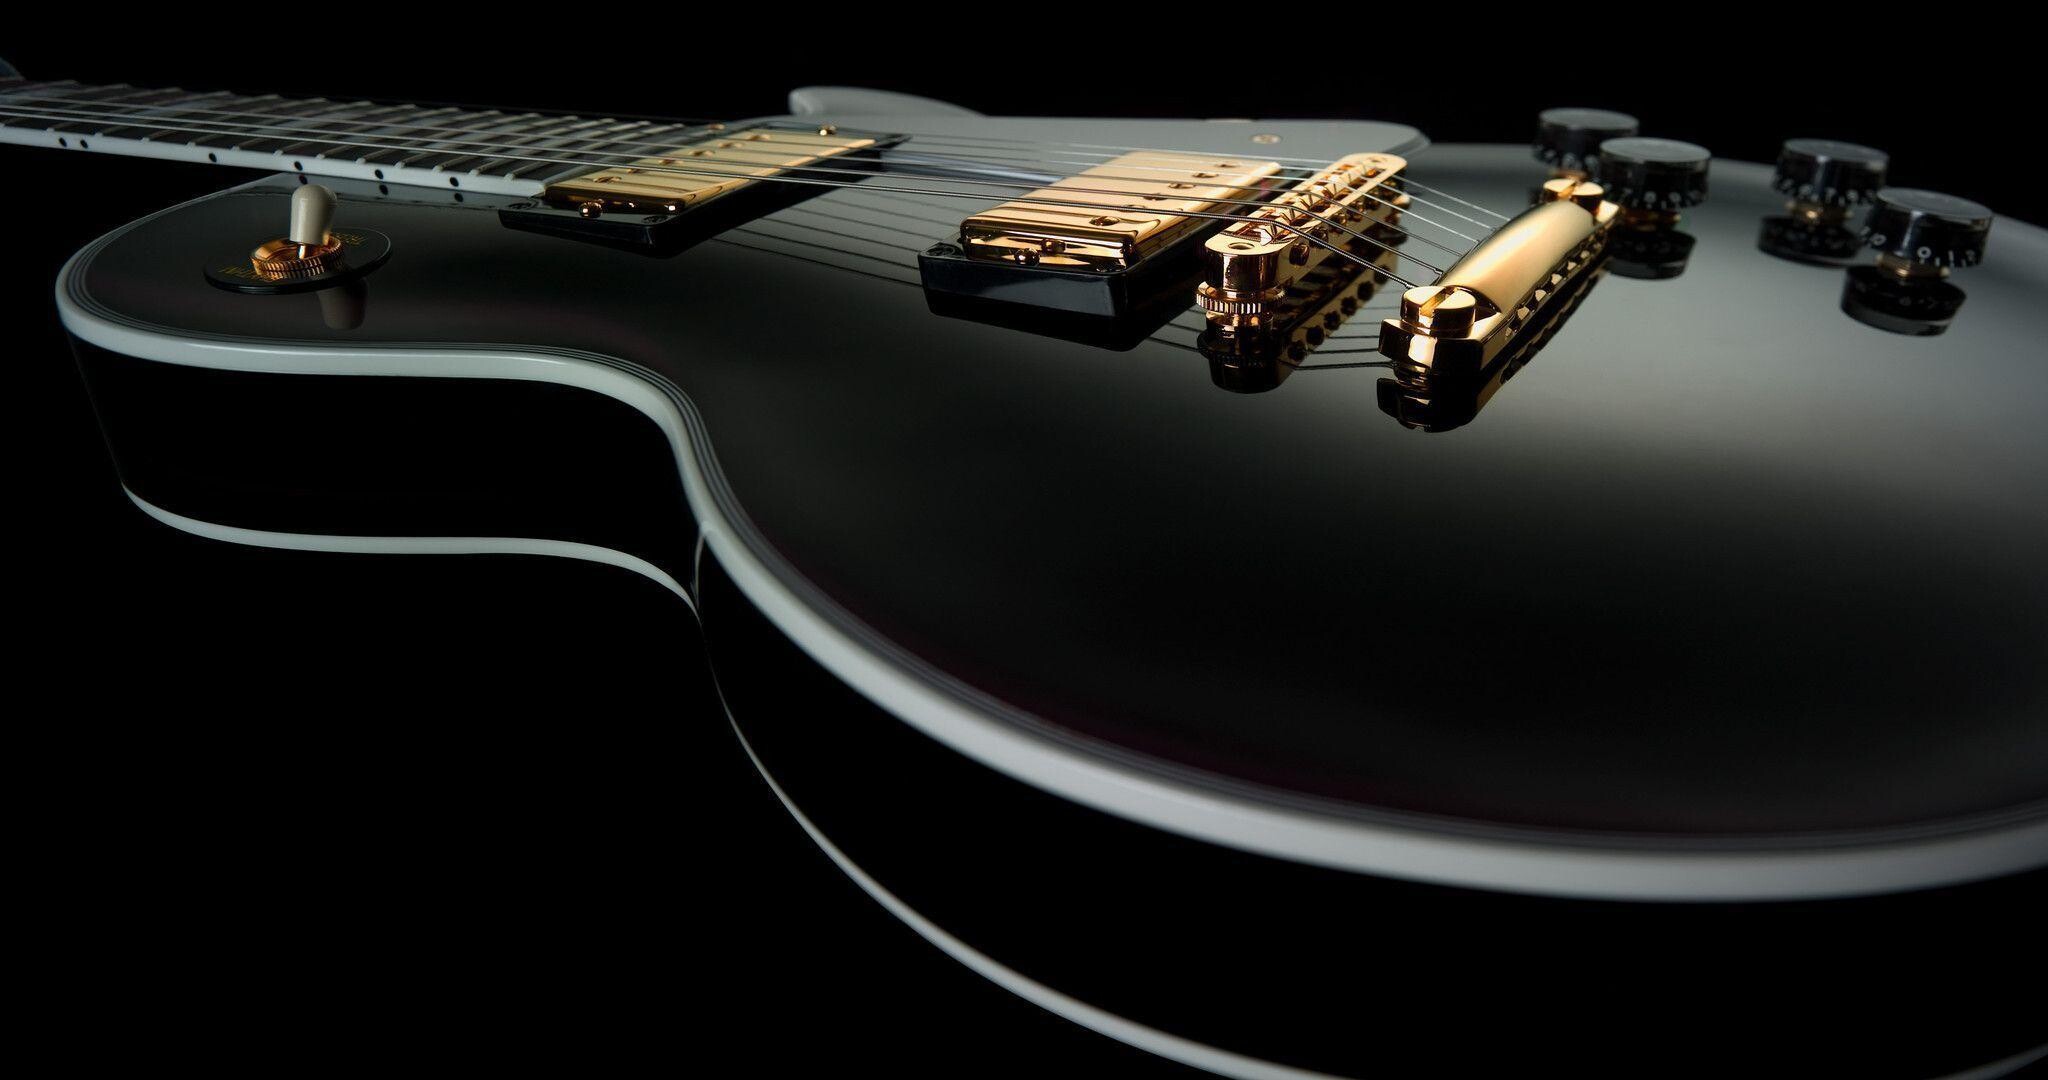 Gibson Guitar: Partnered with Dave Grohl to release a limited edition guitar in 2020. 2050x1080 HD Background.